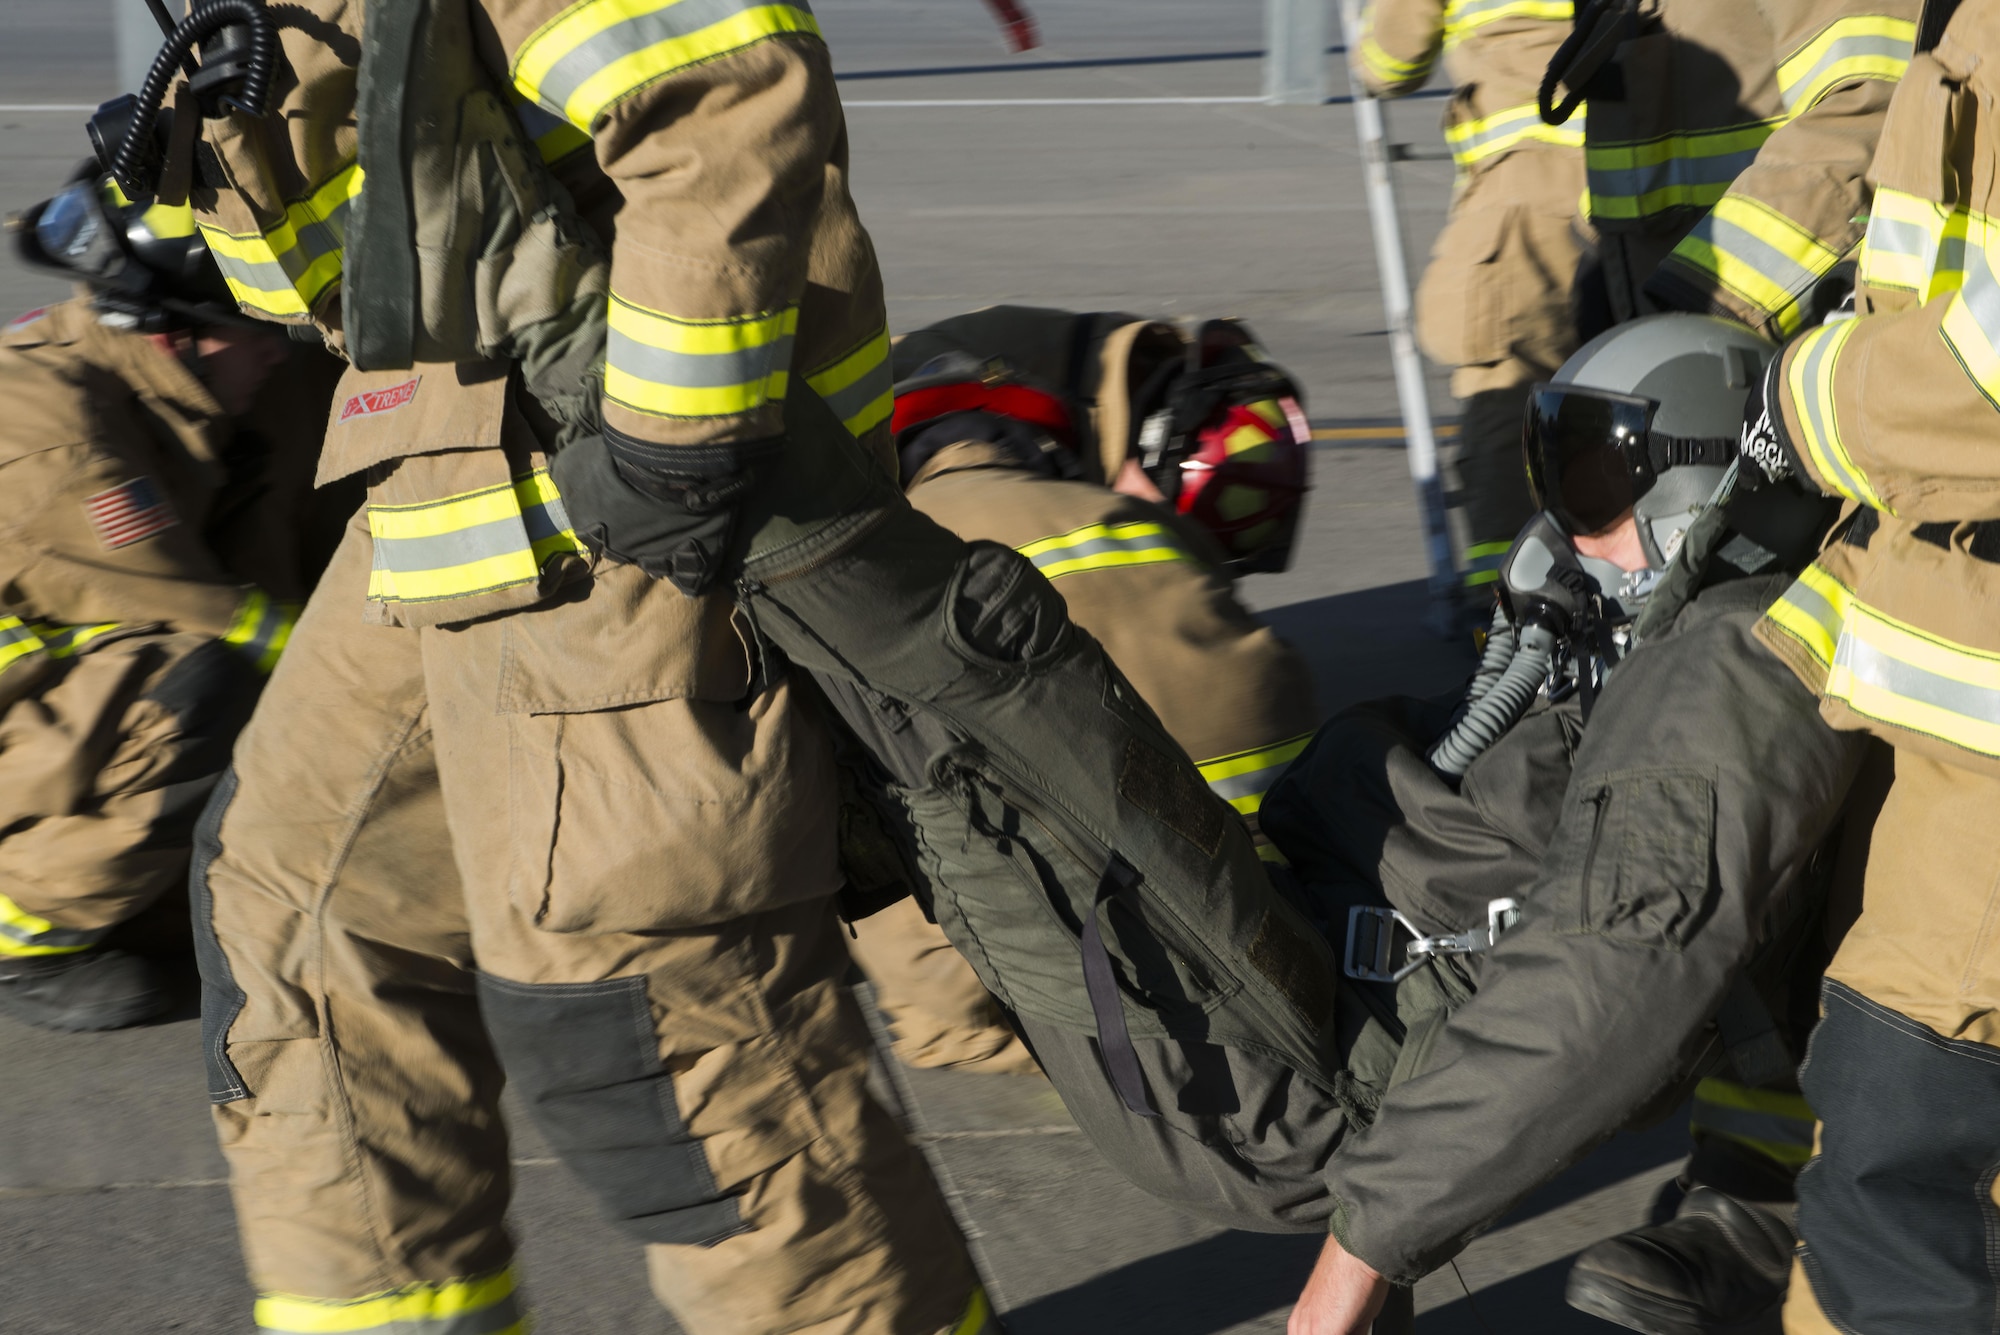 While one airman simulated unconciousness, another fained responsiveness and first responders had to treat their symptoms.